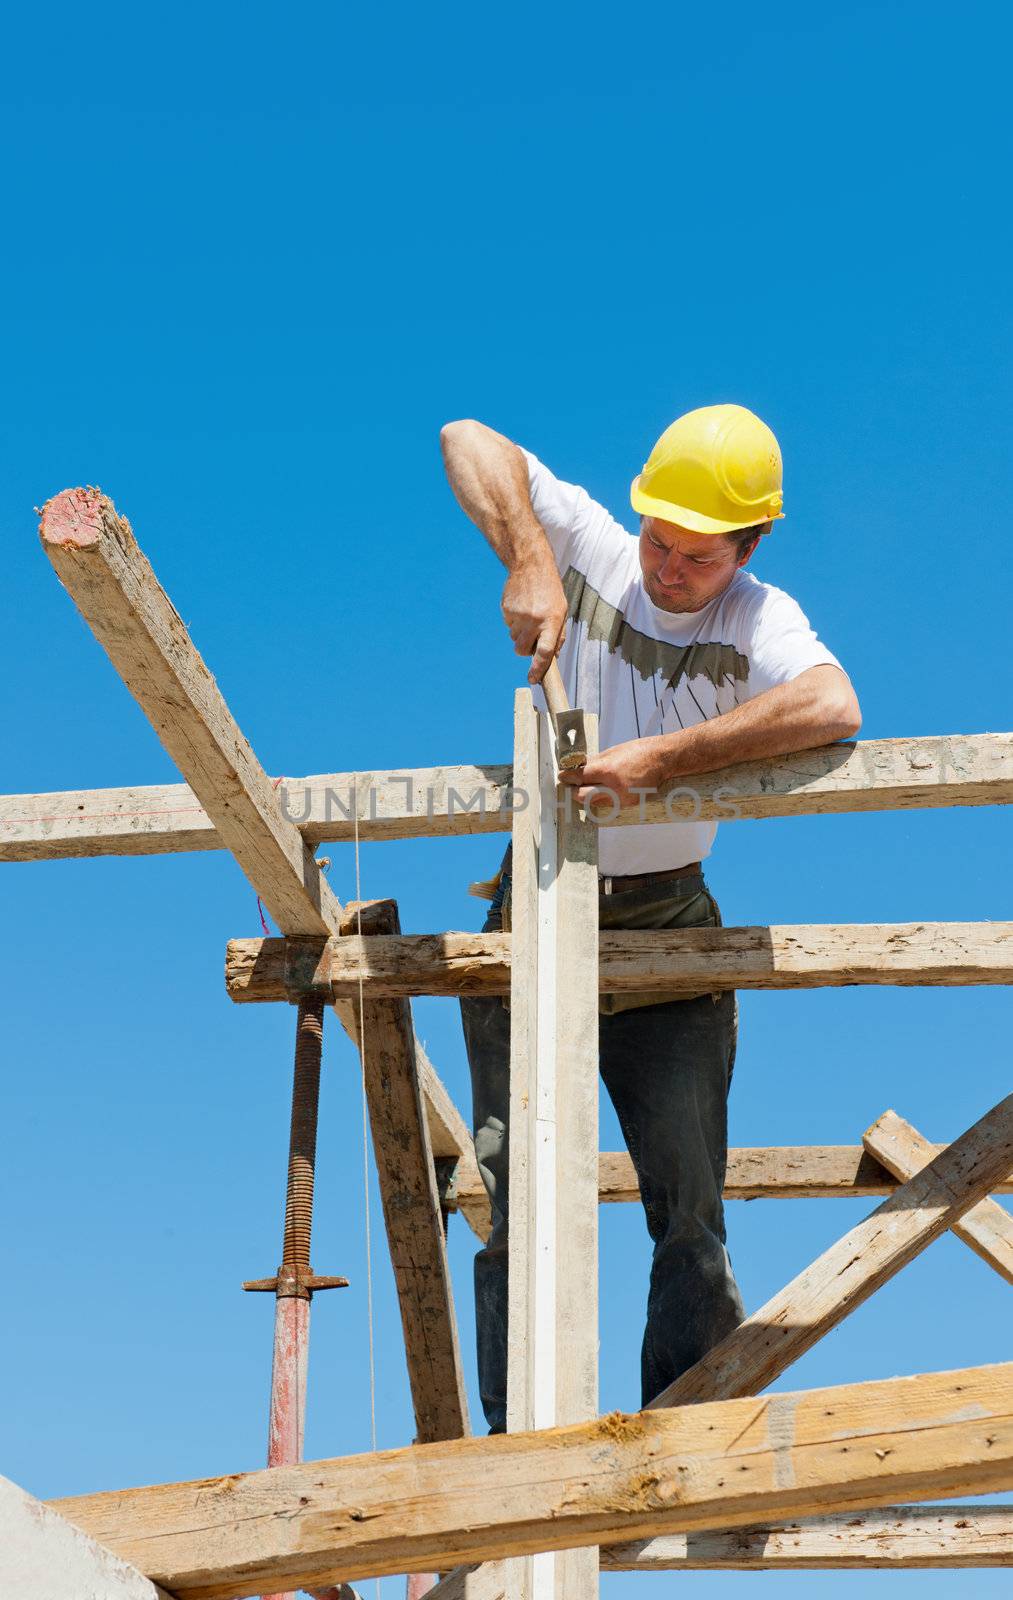 Authentic construction worker on scaffold, hammering nails on the wooden formwork of a construction site